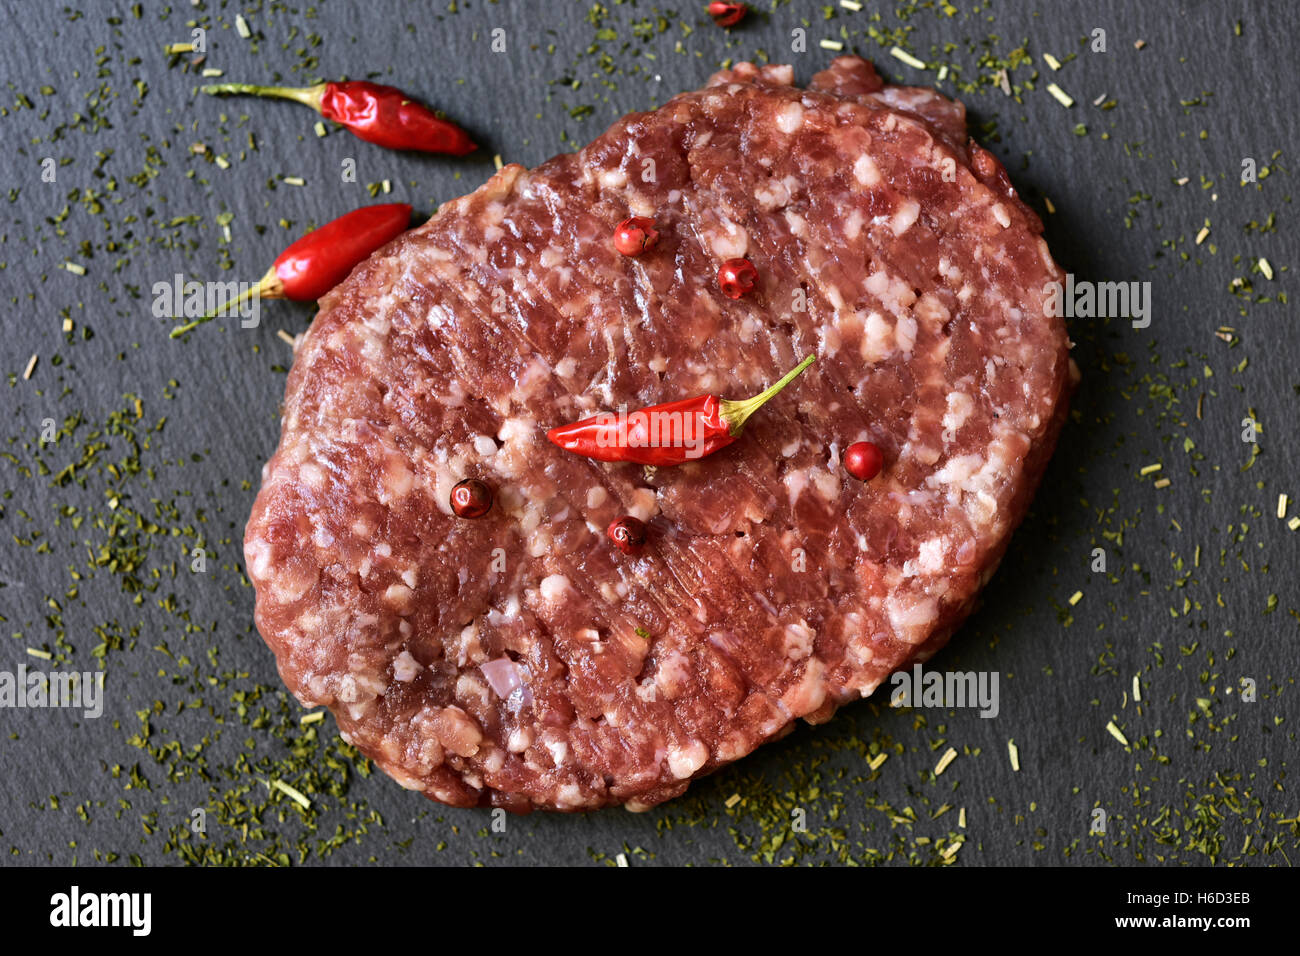 closeup of raw burger spiced with red peppercorns, chili peppers and herbs on a slate surface Stock Photo